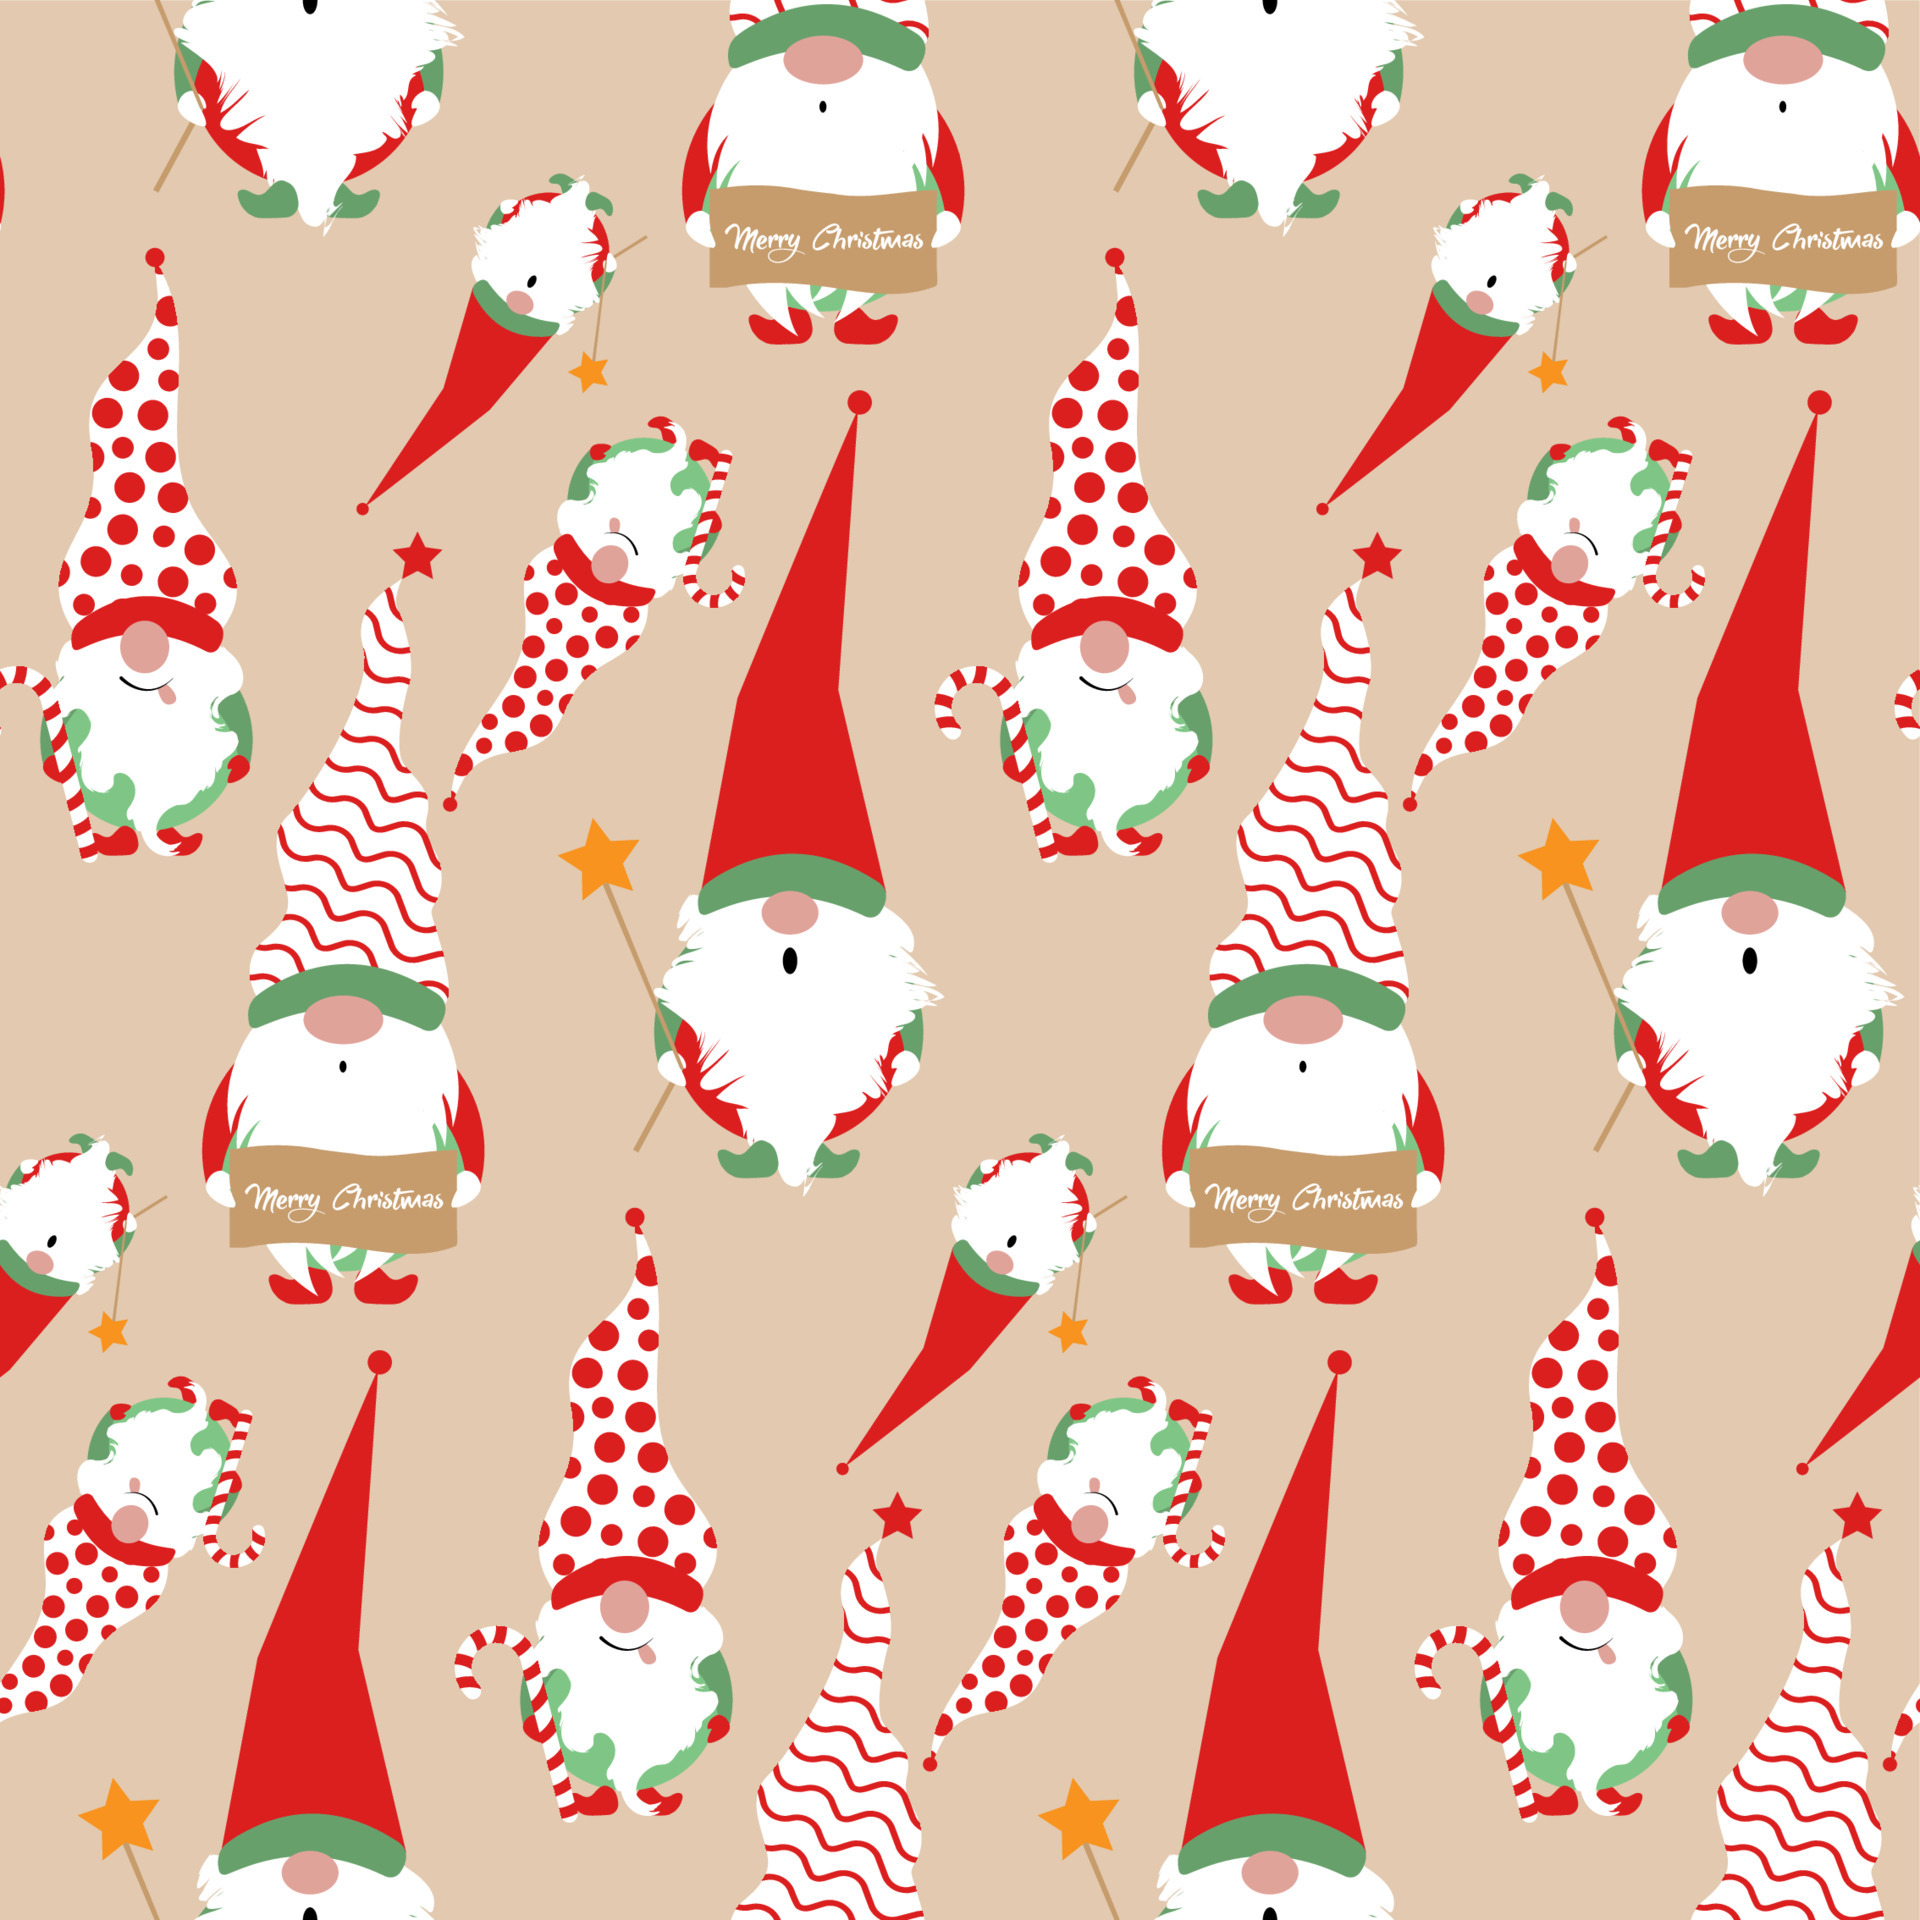 Seamless print set of Christmas Gnome, Scandinavian Nordic Gnome, Cute Christmas Santa Gnome Elf. Vector Illustration isolated on beige background. Xmas elements for paper design